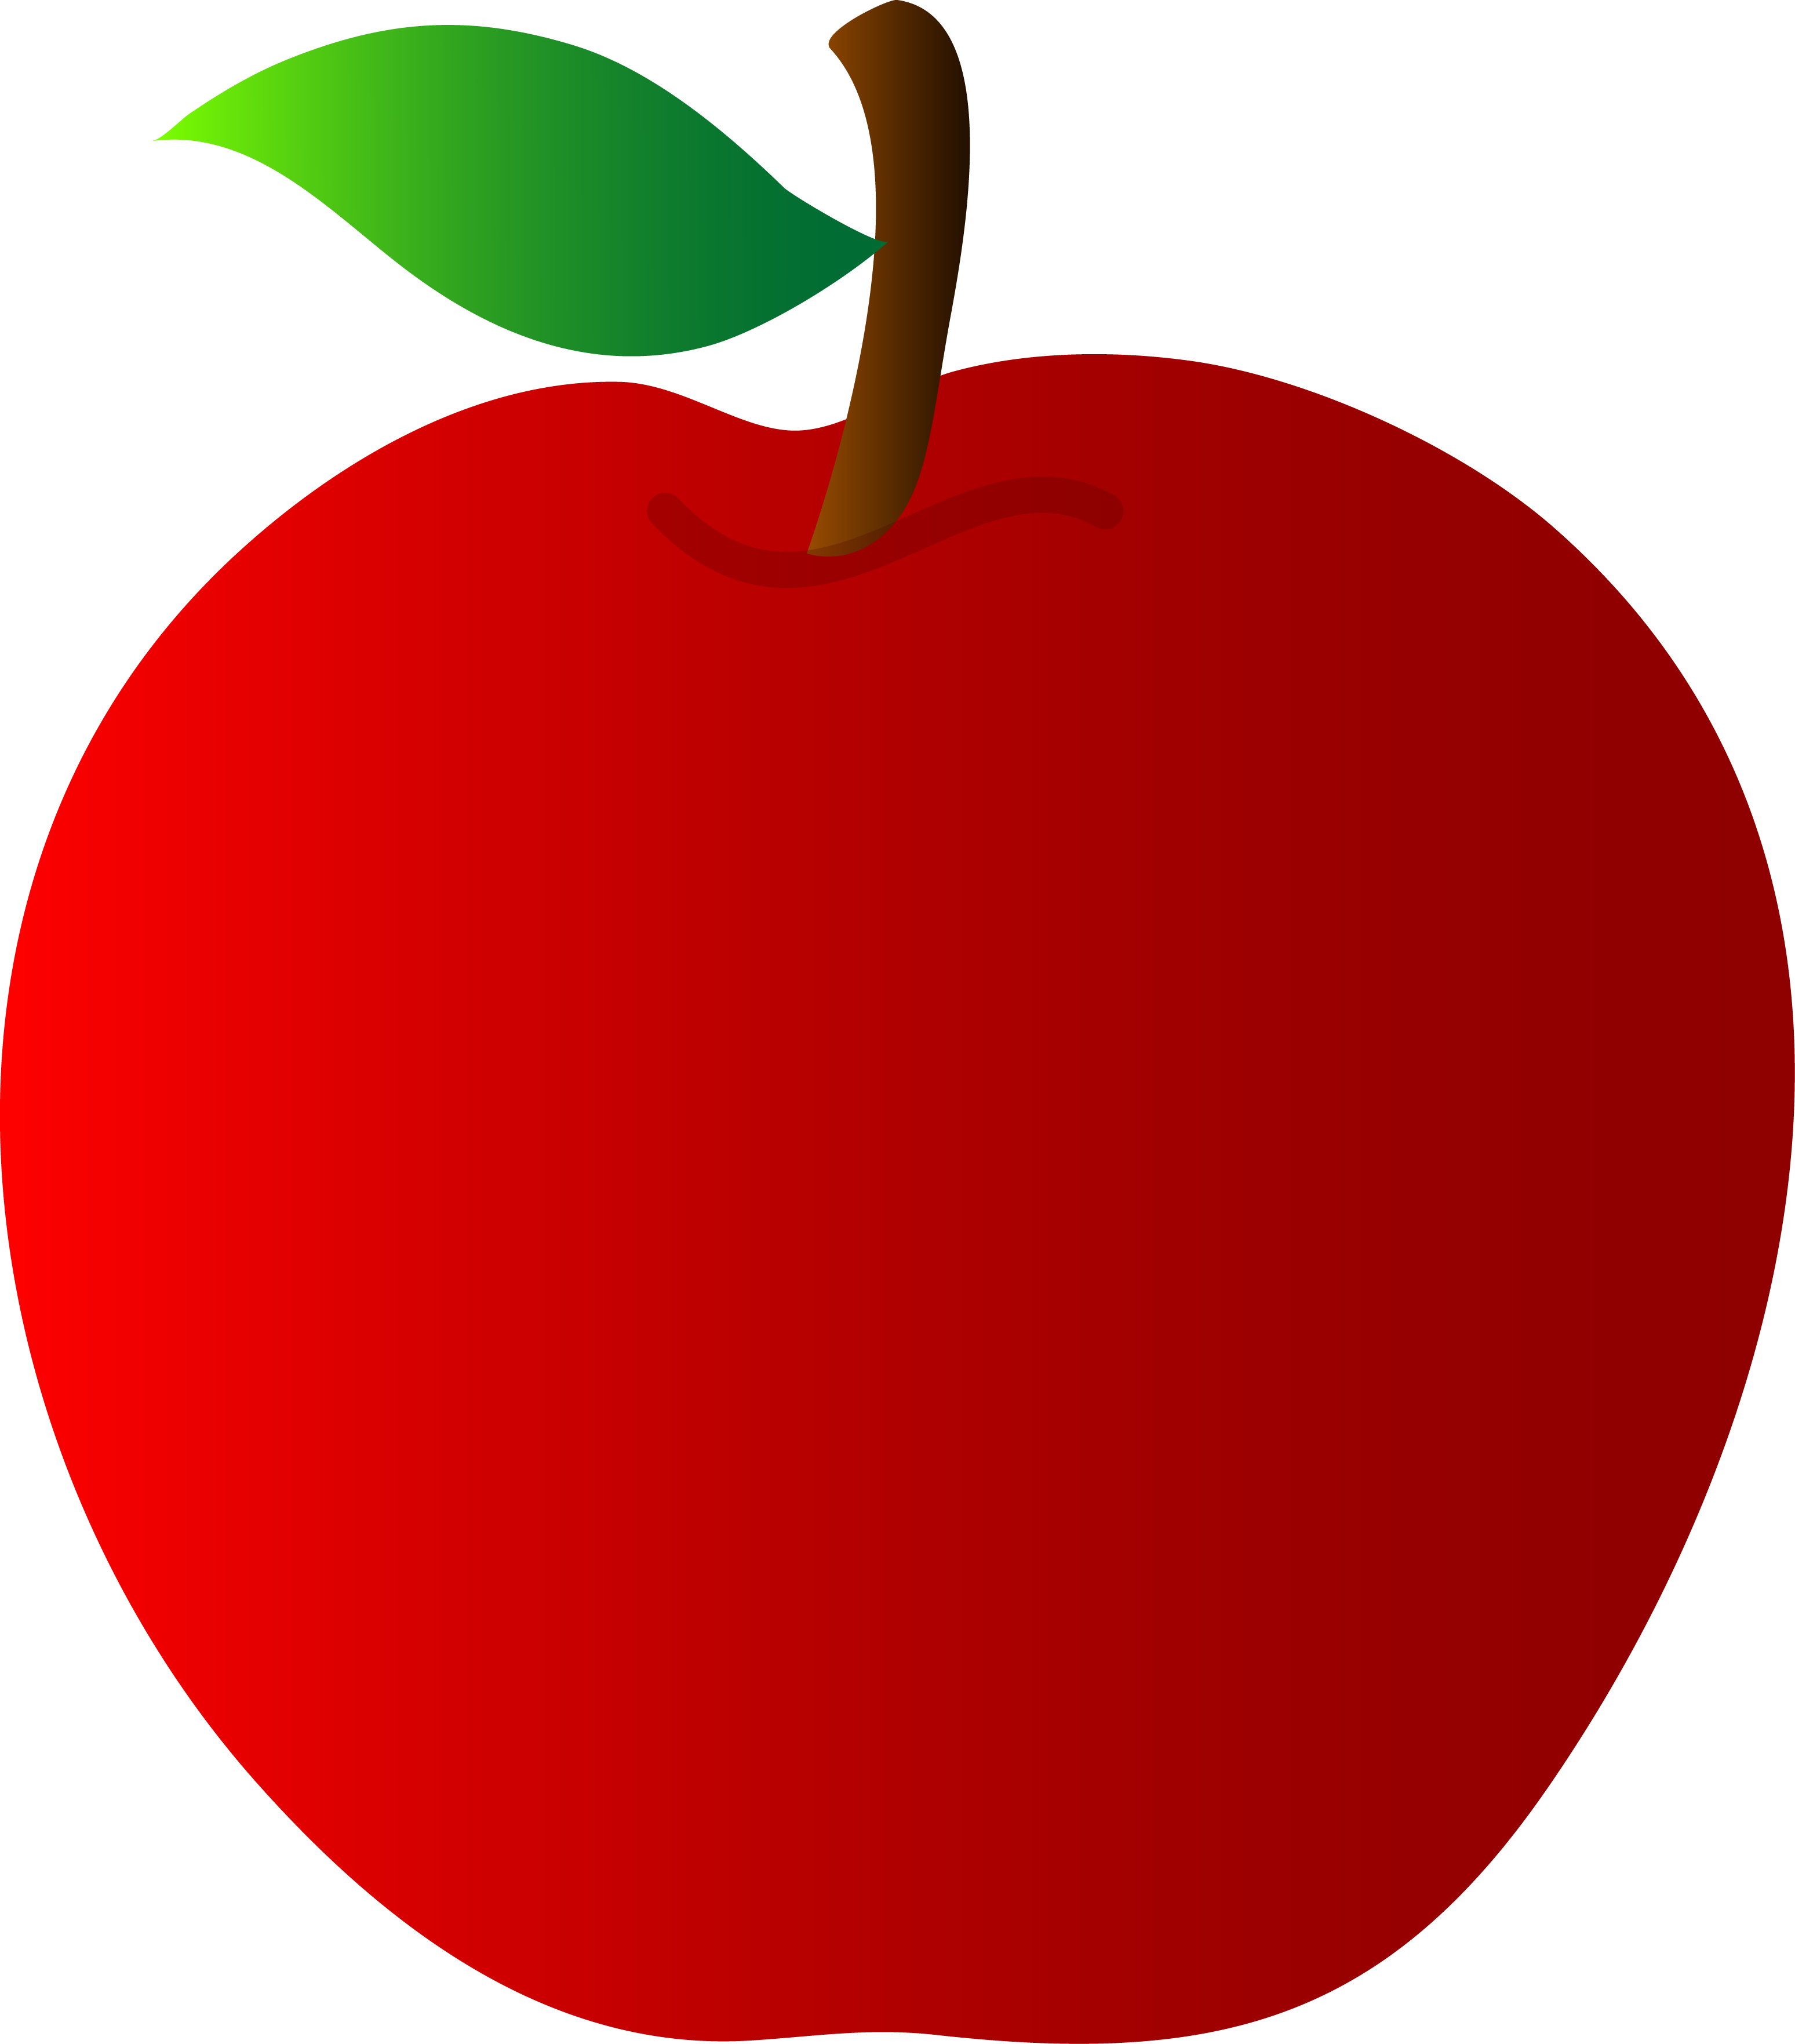 Cute Apple Clip Art Apple Red 1 Clipart Png